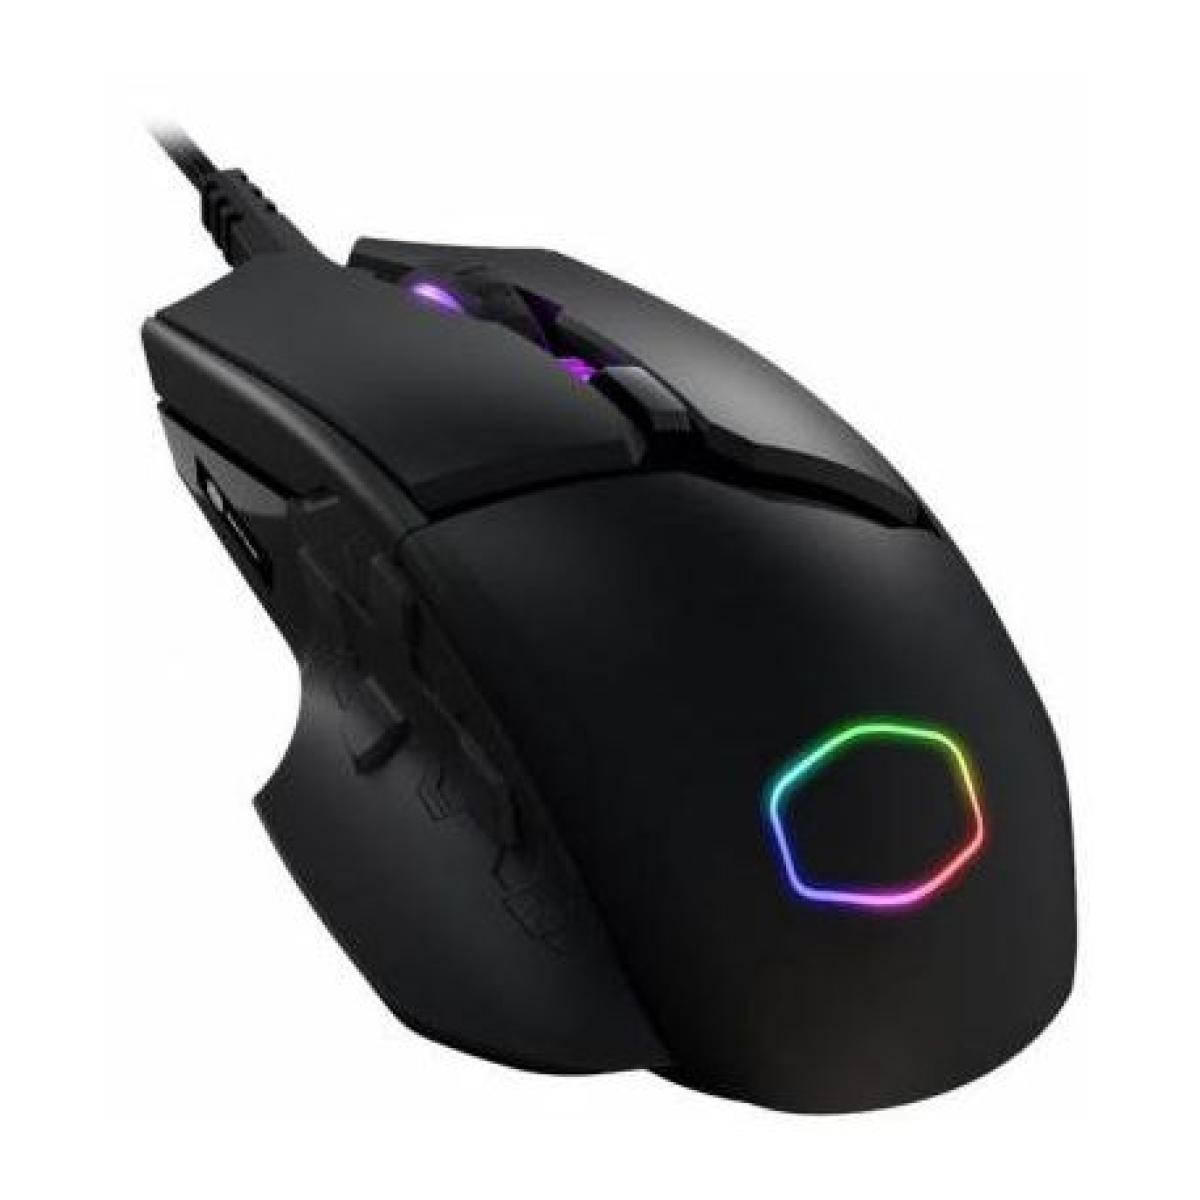 Cooler Master MM830 Gaming Mouse with 24,000 DPI Sensor Gaming Mouse